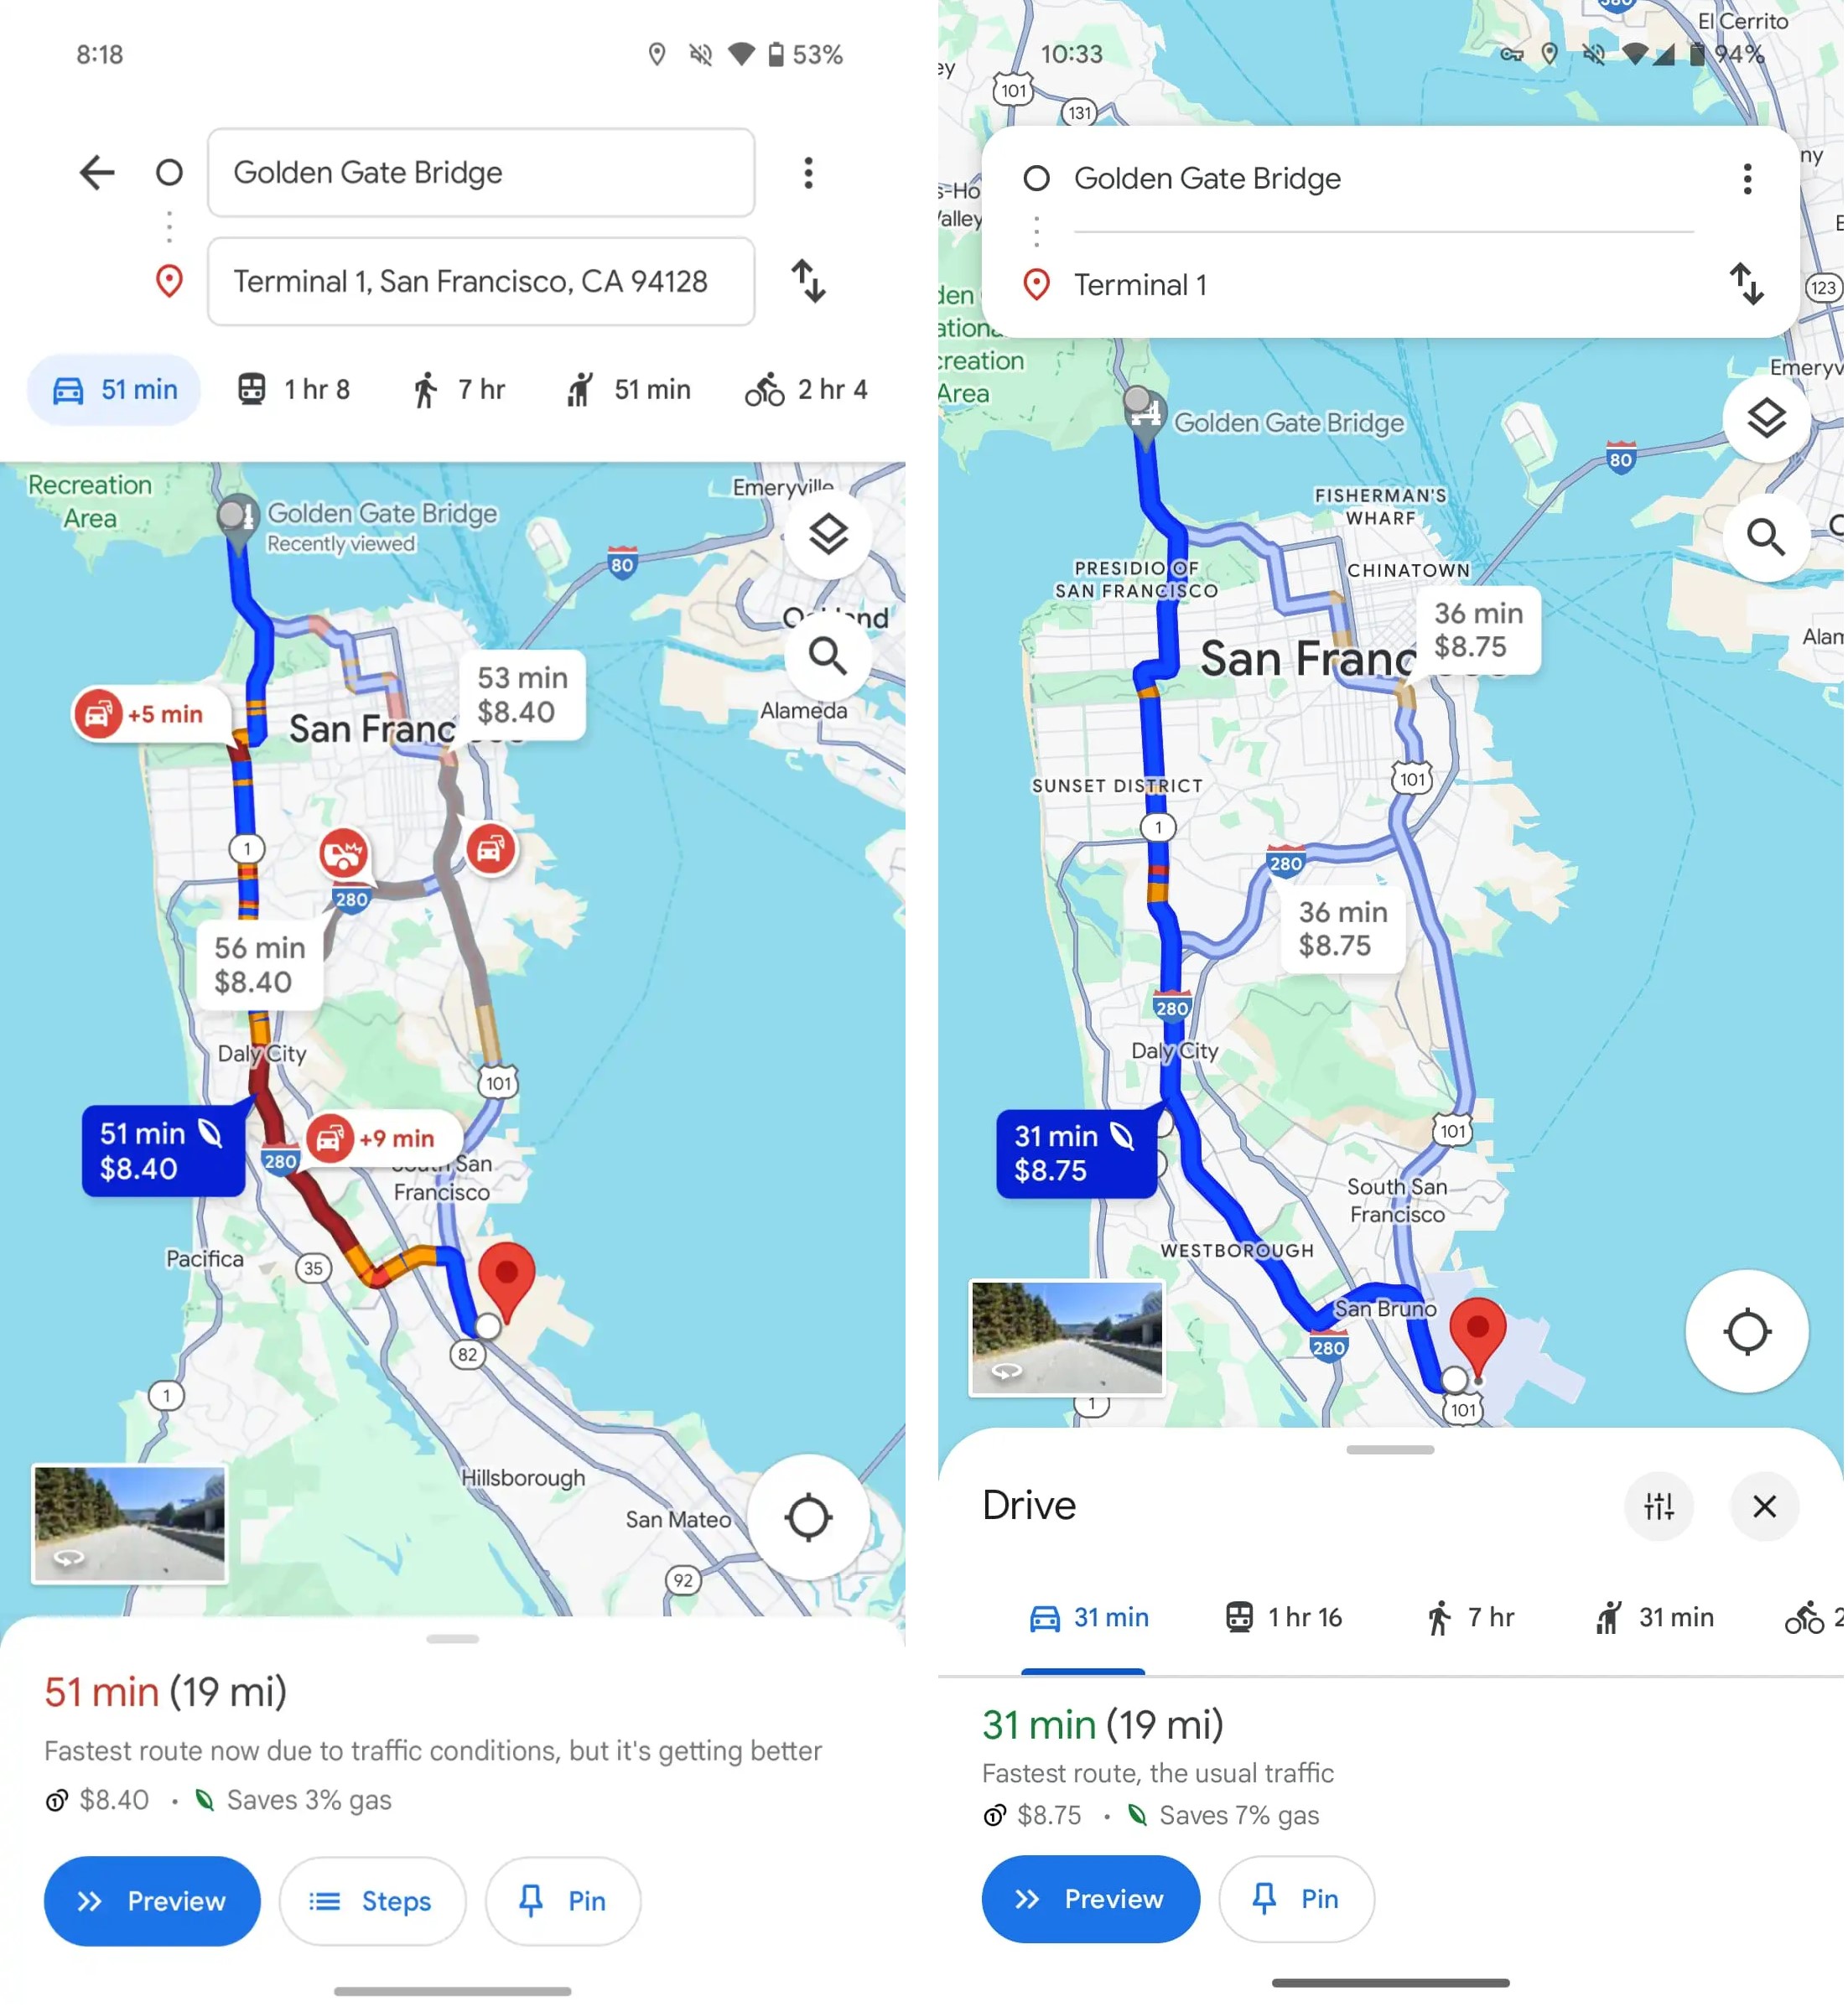 The Google Maps user interface is changing